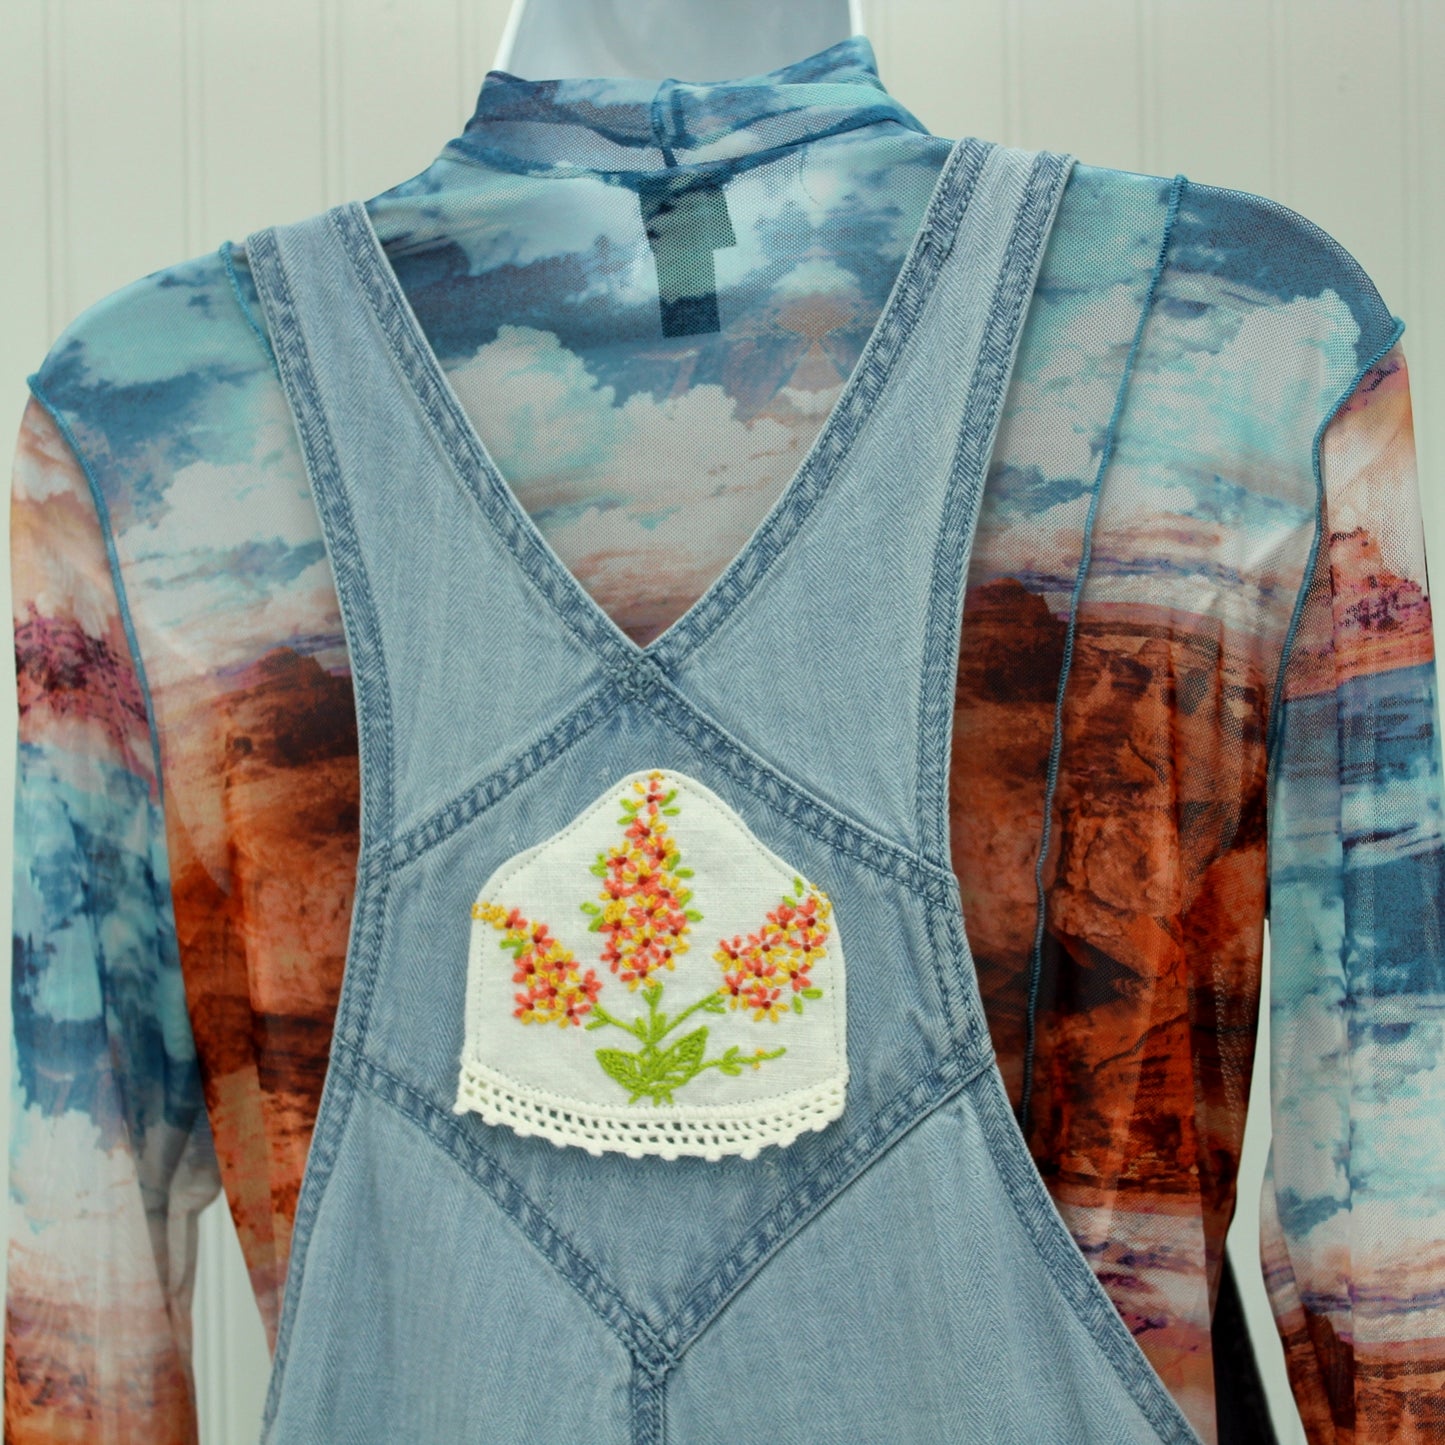 Universal Threads New Overalls Wild Fable Shirt Patzi Design Embroidery overall bibs adjust buckles